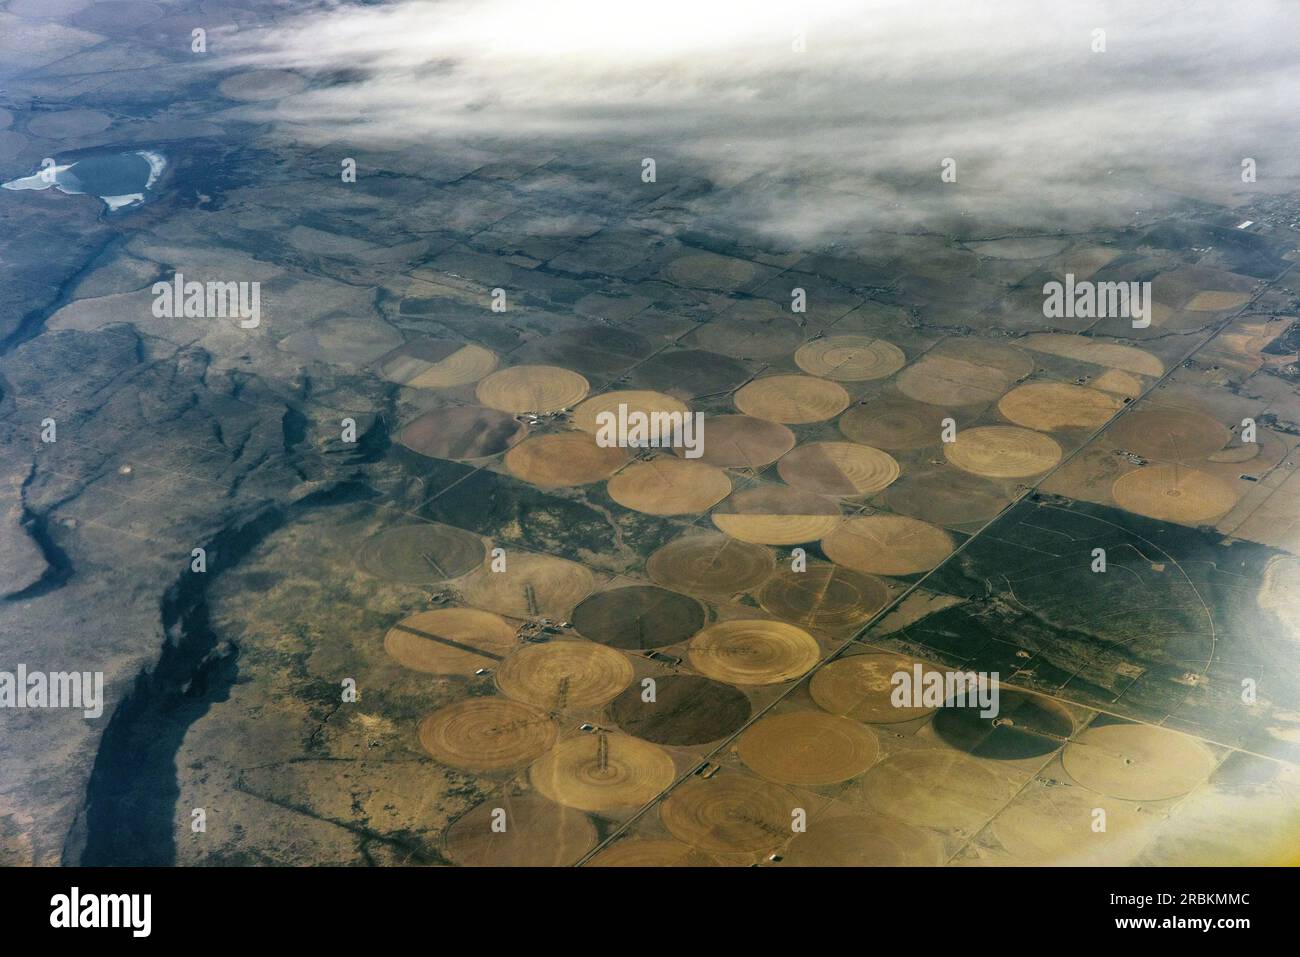 numerous circular irrigated cereal fields in the desert, pivot irrigation systems, aerial photo, USA, Arizona, Sonora-Wueste, Phoenix Stock Photo